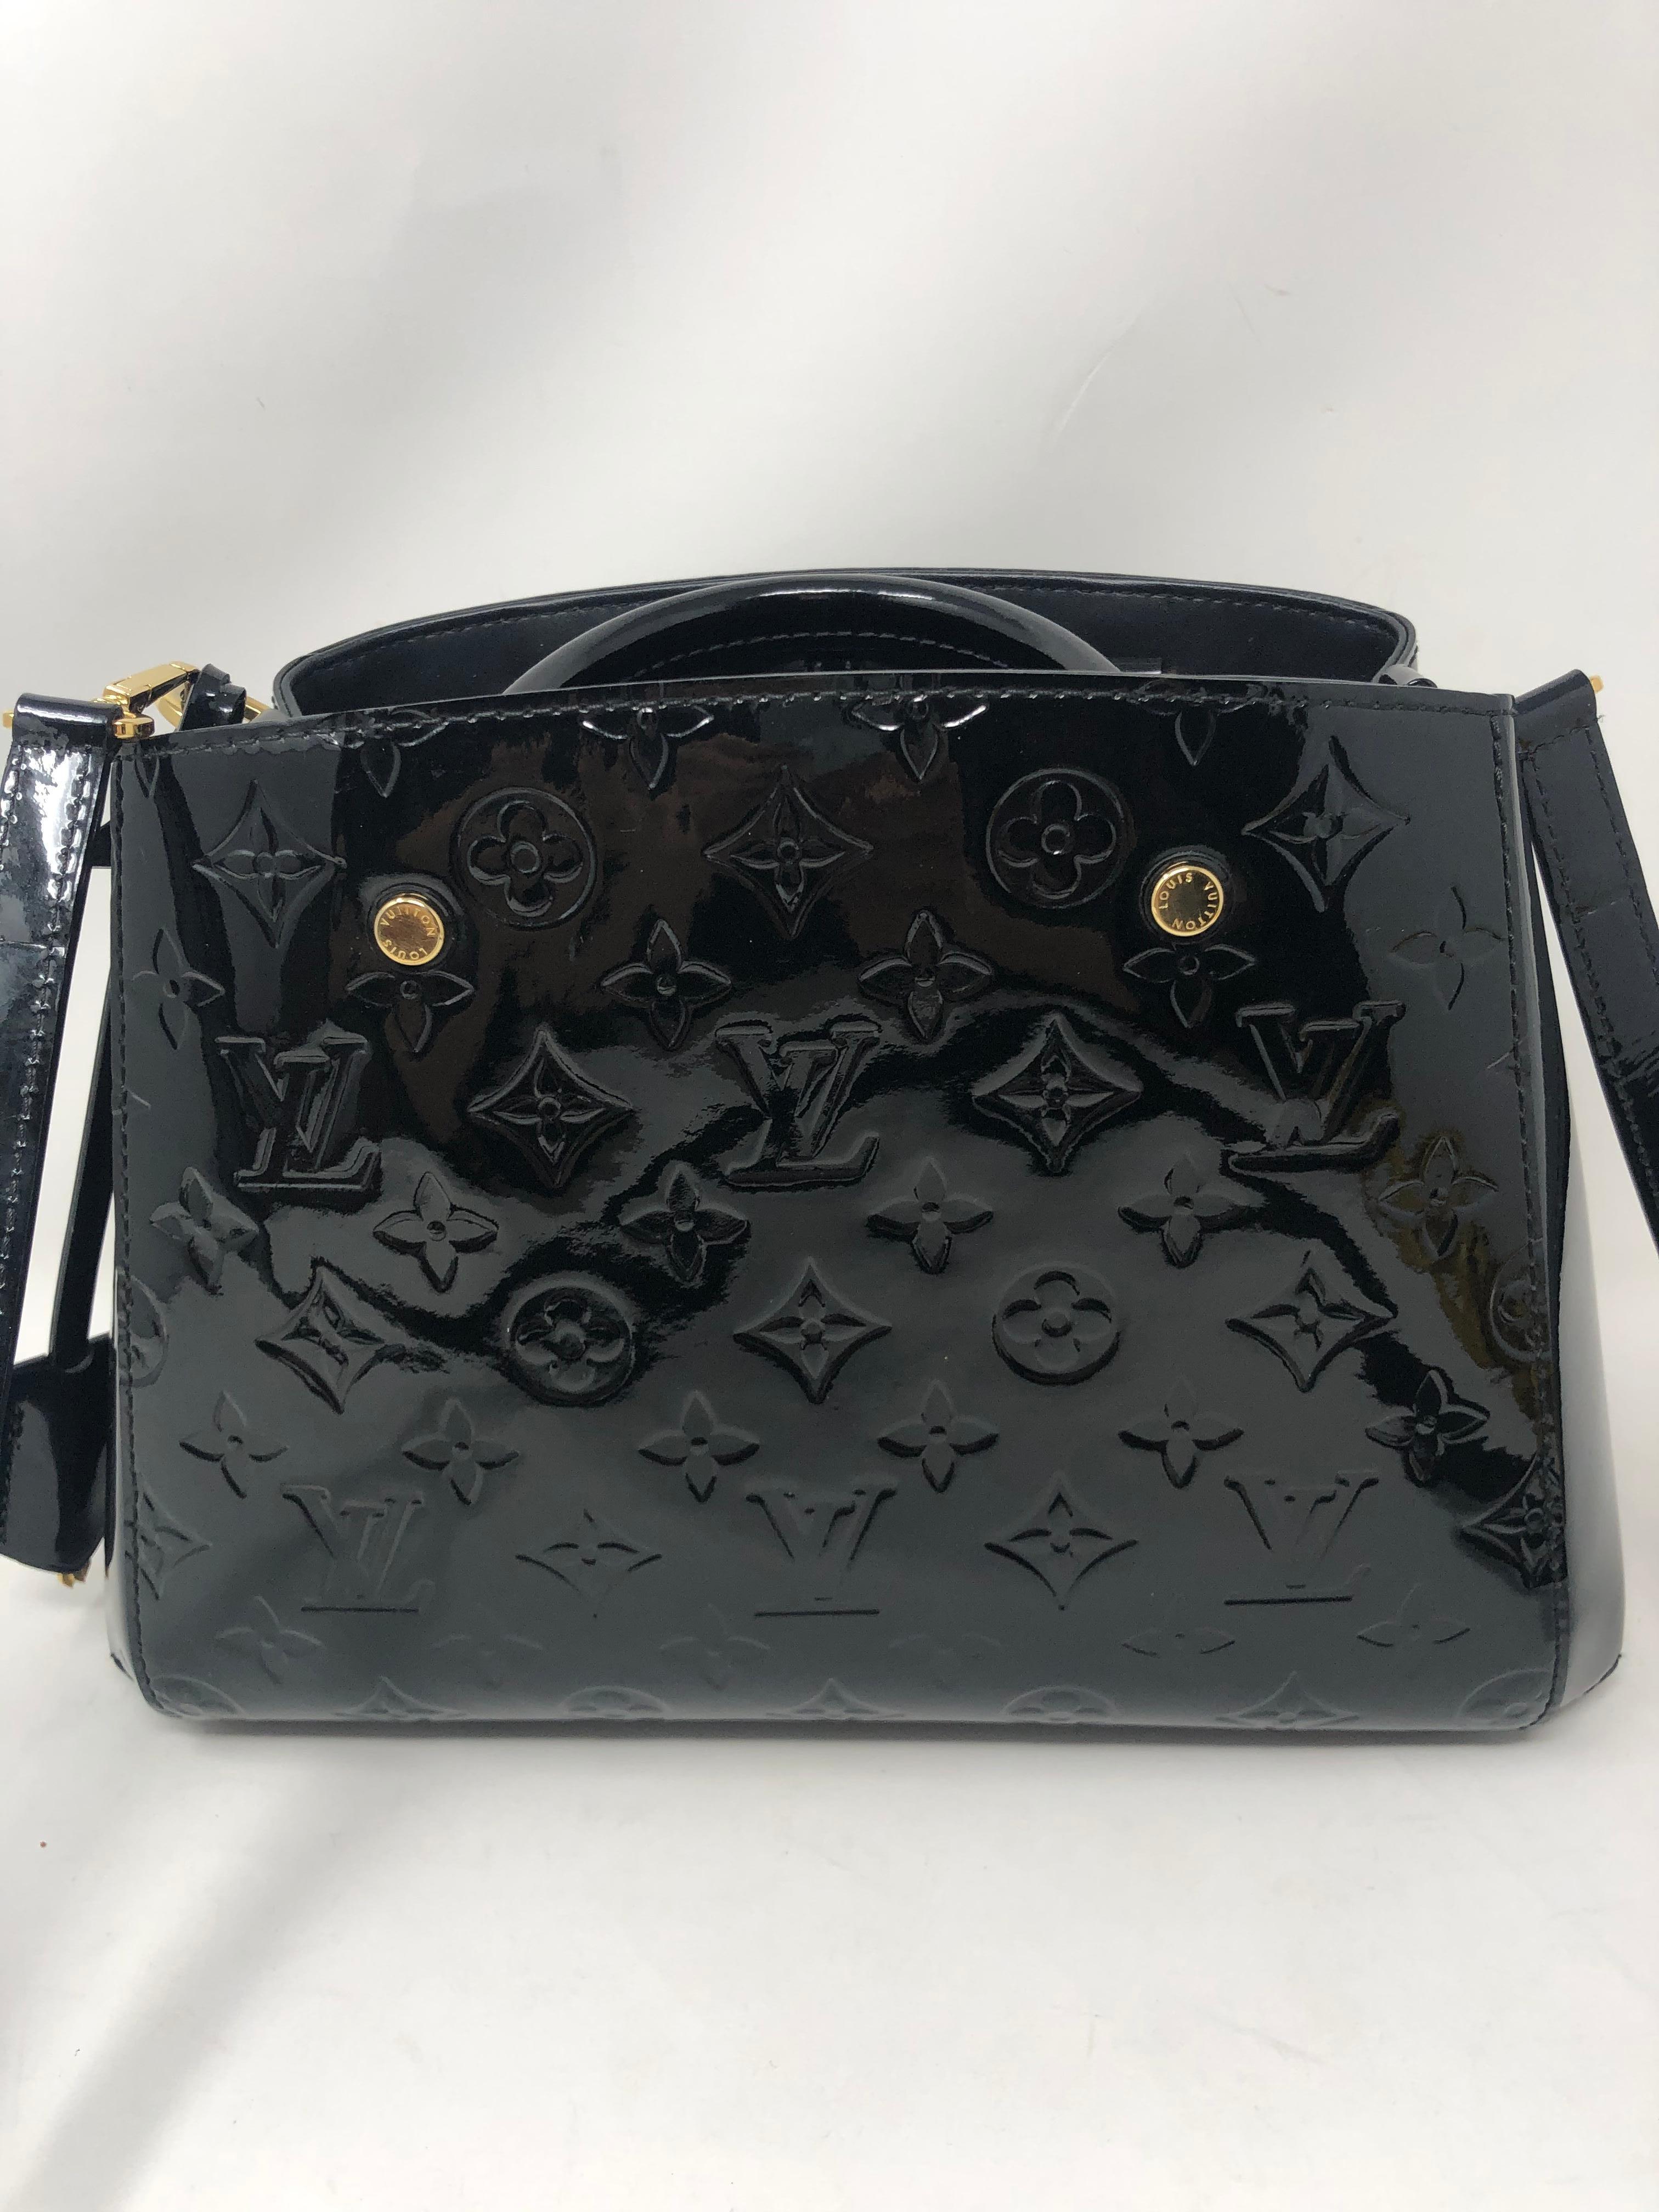 Louis Vuitton Vernis Black Montaigne BB Bag. Can be worn as a crossbody. 2 way bag. All leather in excellent condition. Guaranteed authentic. 